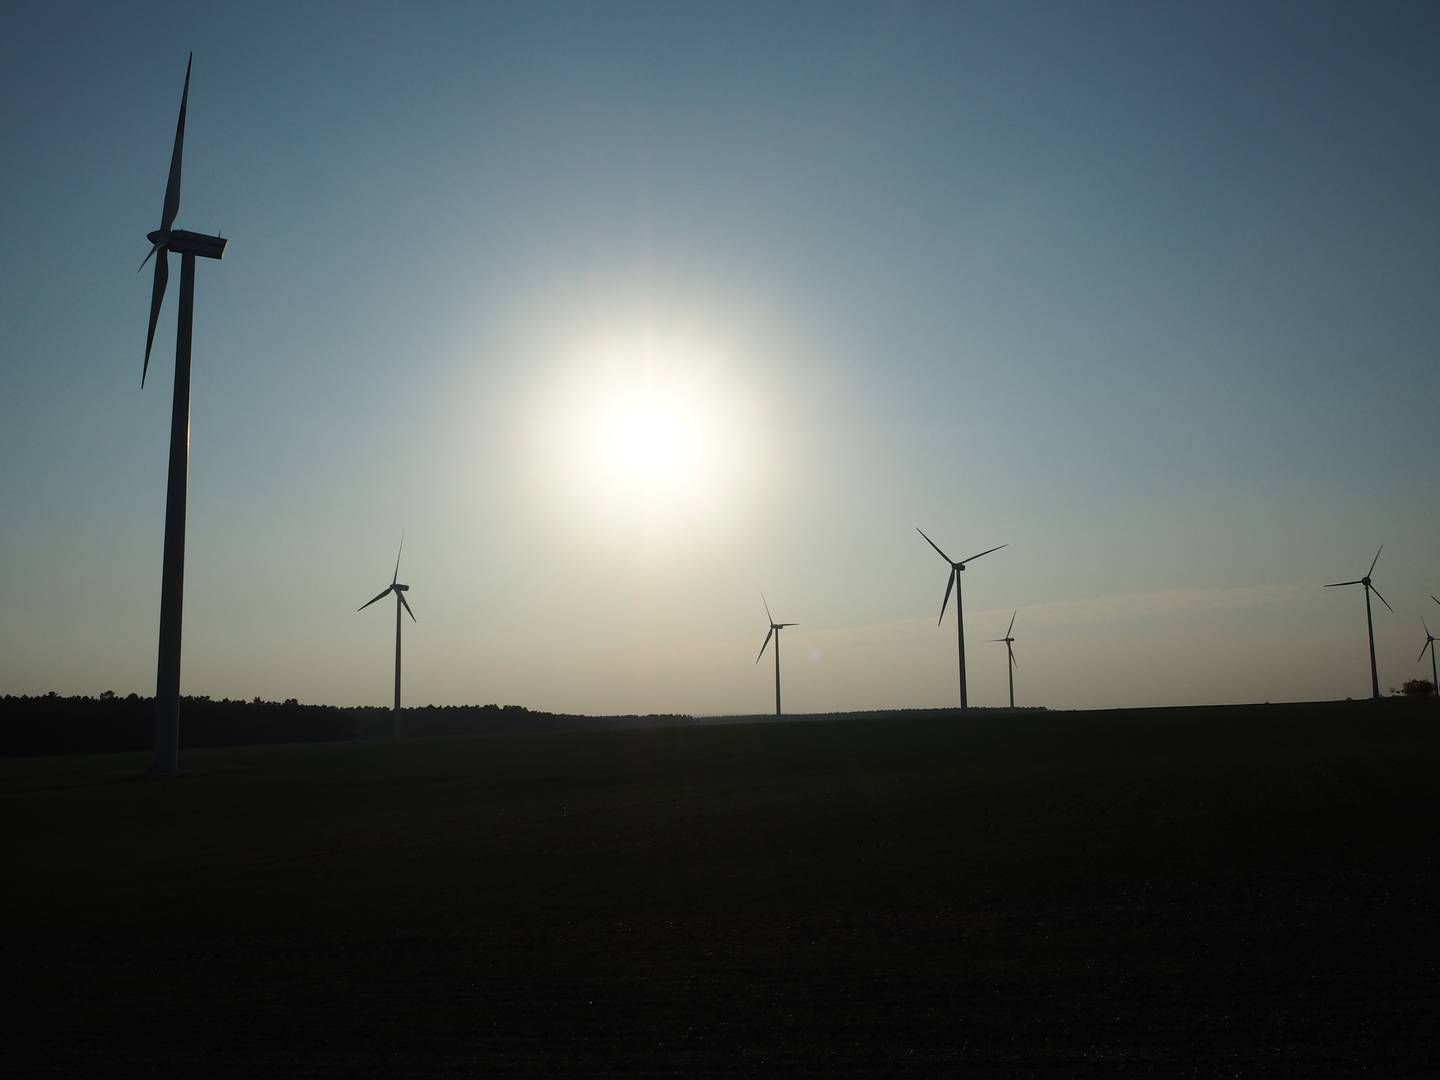 European Energy plans to replace the 2 MW turbines at Niemegk in Germany with newer models. | Photo: European Energy/pr.